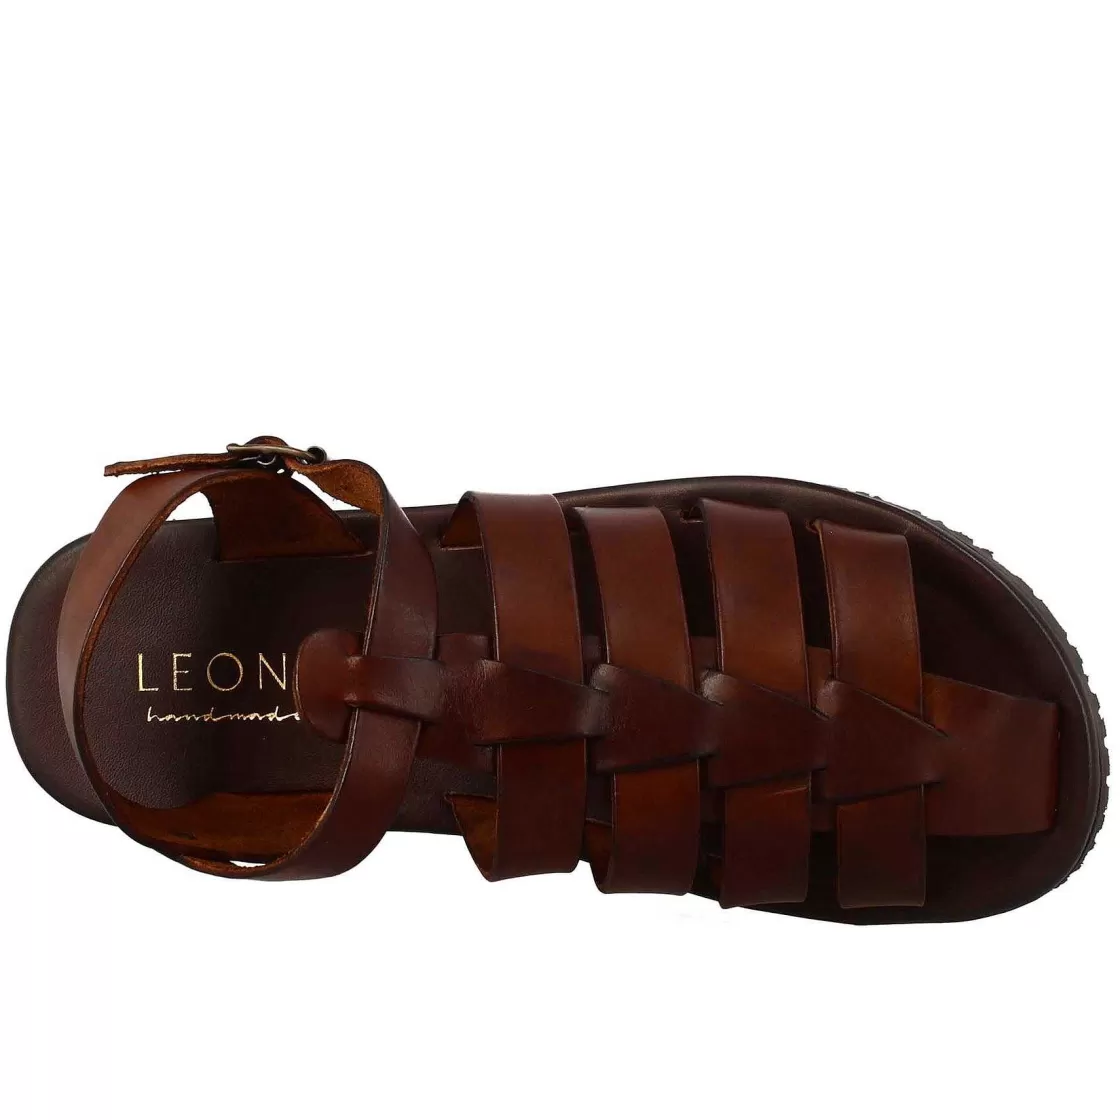 Leonardo Men'S Franciscan Sandals Handmade In Brown Leather With Ankle Strap Discount